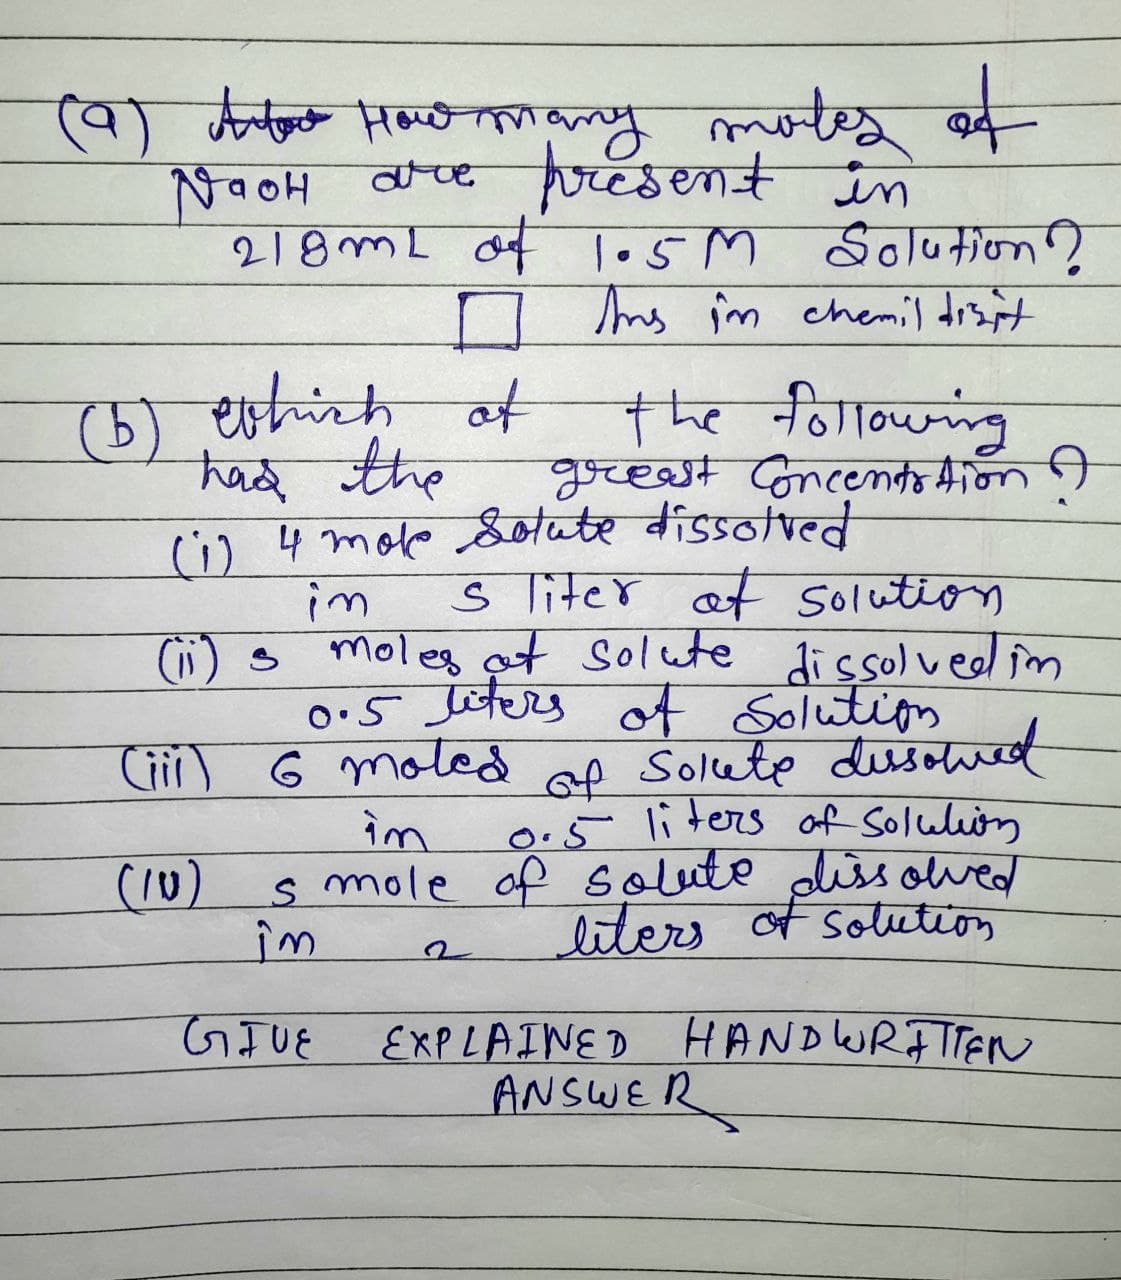 Jiter of
(9) Artout How many moles
Naoh
are present in
218mL of 1.5M Solution?
□ in
Ins în chemil disit
(5) which of
had the
(1) 4 moke Solute dissolved
im
(ii) s
the following
greast Concentration ?
(iii)
(10)
5 liter at Solution
moles at Solute dissolved in
0.5 liters of Solution
6 moled of Solete dissolved
im 0.5 liters of Solution
s mole of solute dissolved
liters of solution
îm
GIVE
EXPLAINED HANDWRITTEN
ANSWER